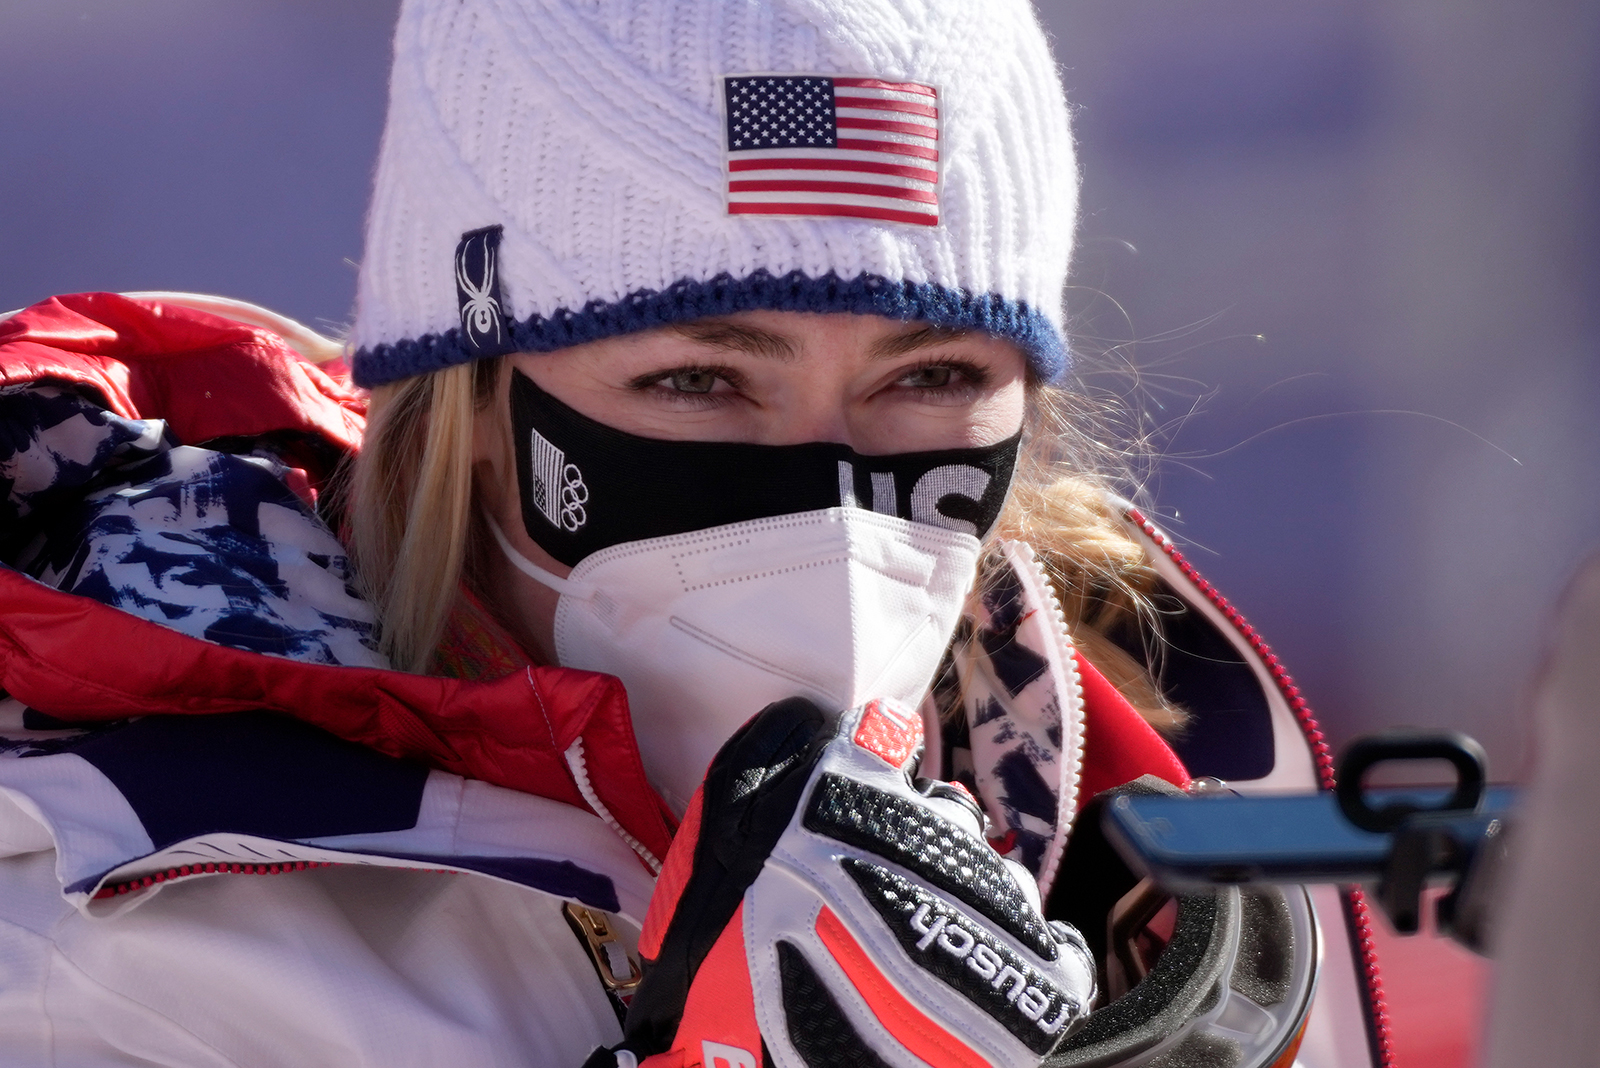 Mikaela Shiffrin waits in the finish area after women's downhill training on February 14.